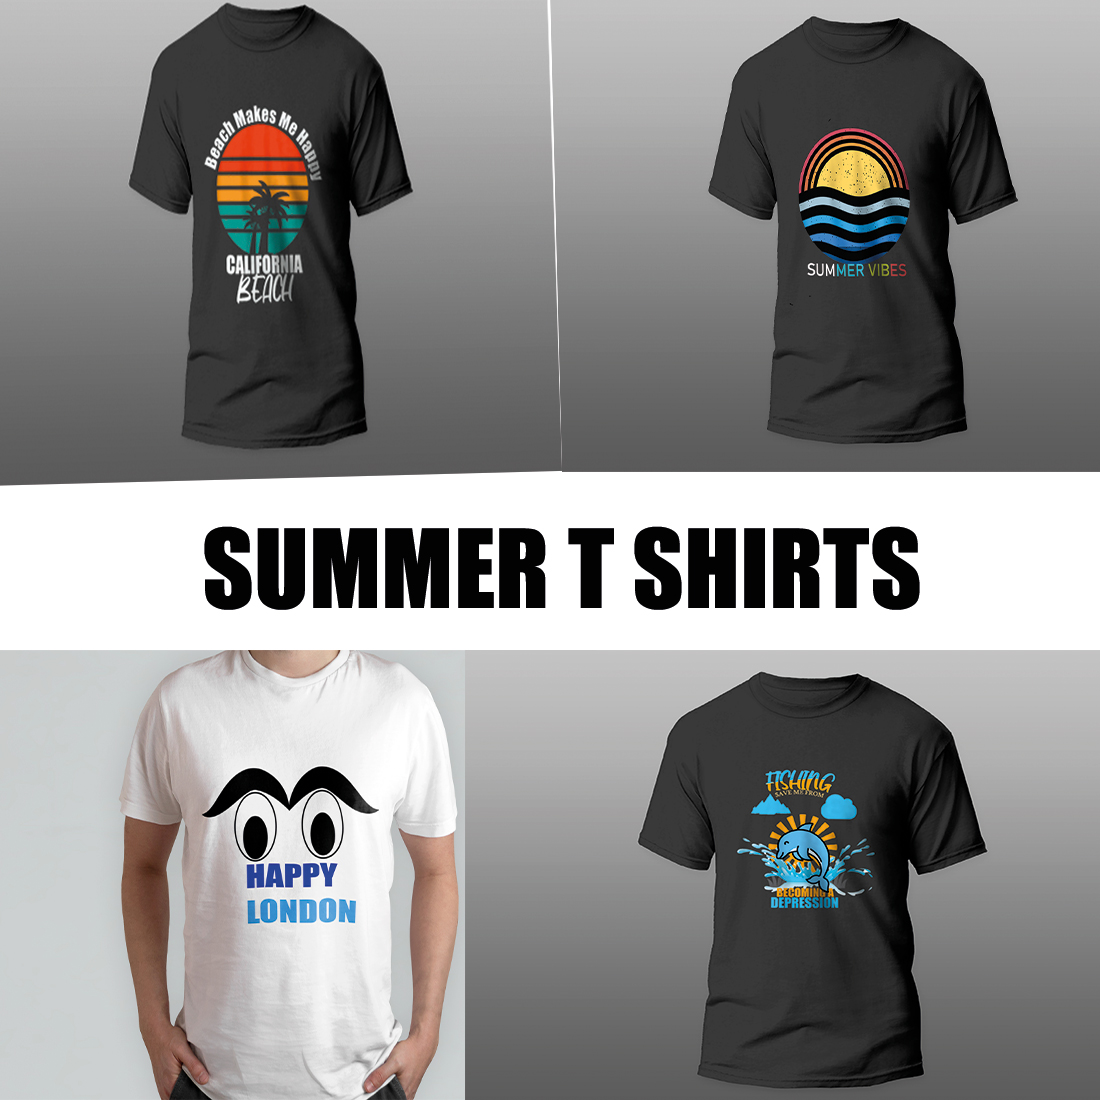 Vintage Style Summer T-shirts cover image.